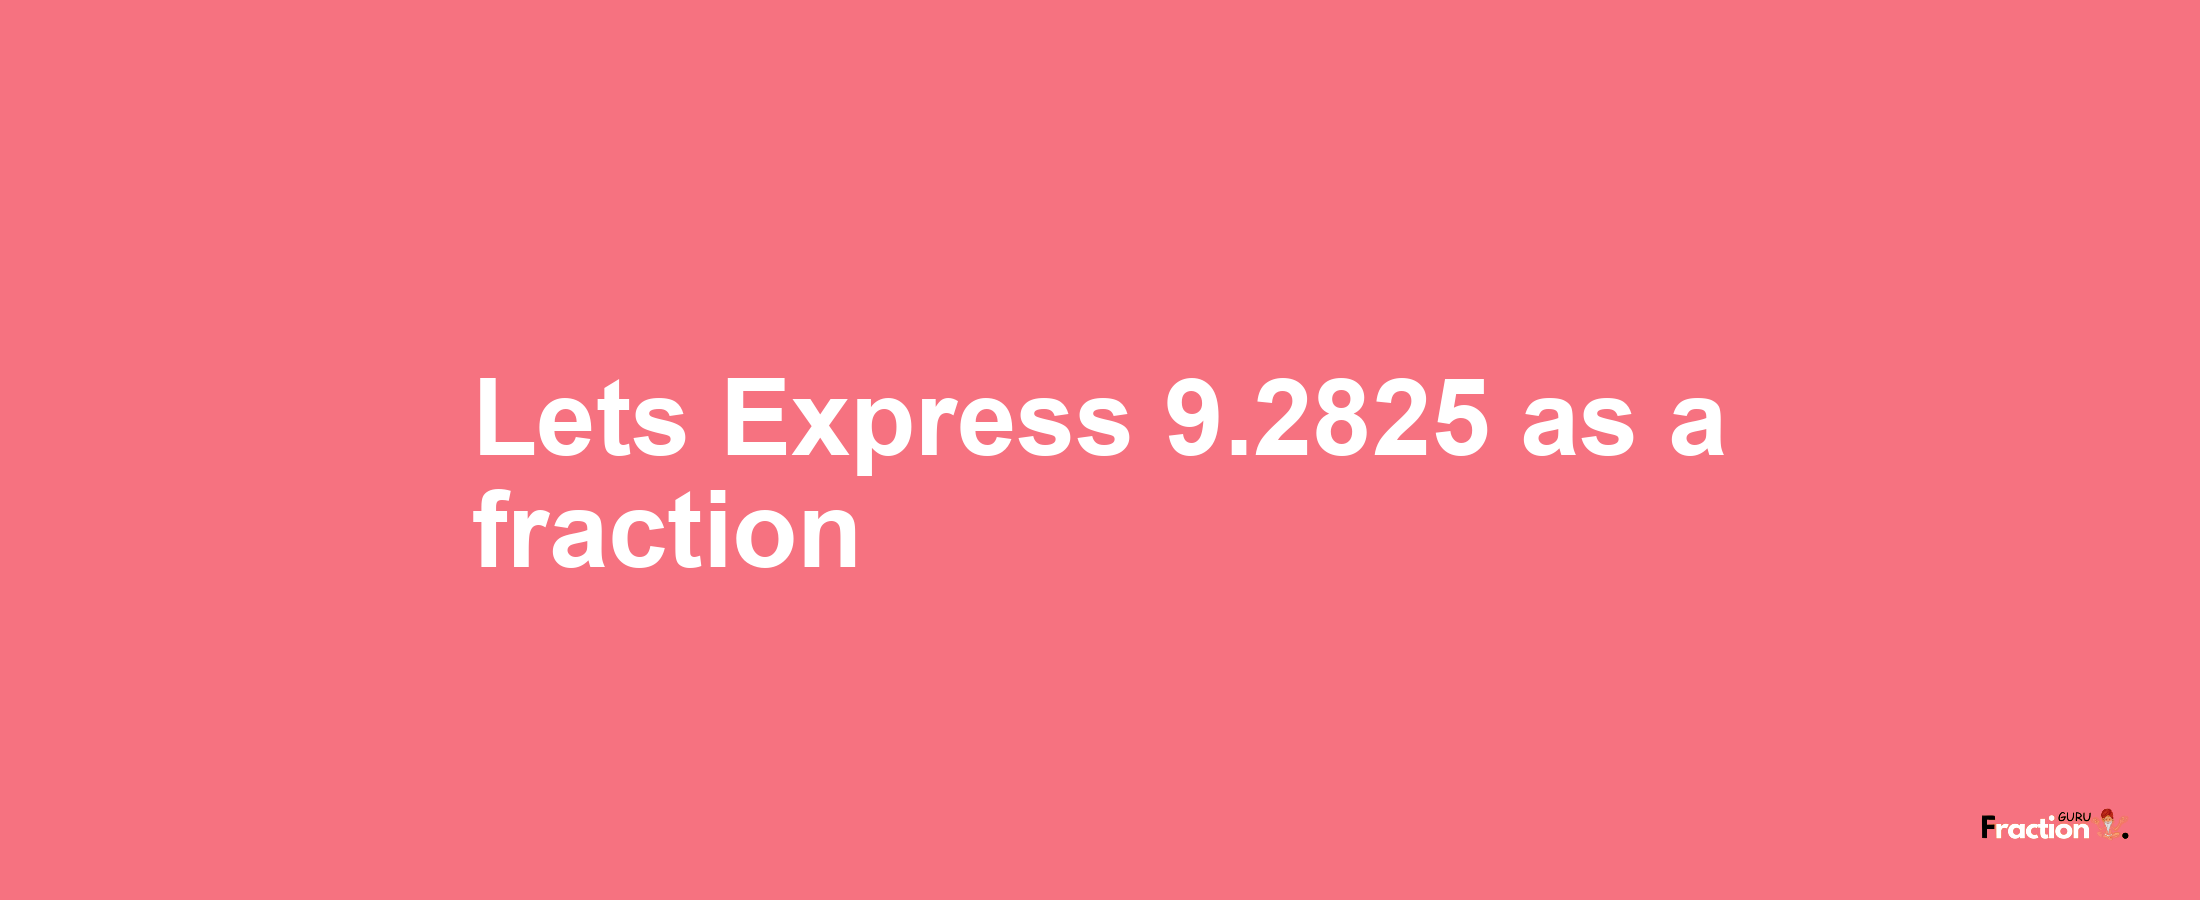 Lets Express 9.2825 as afraction